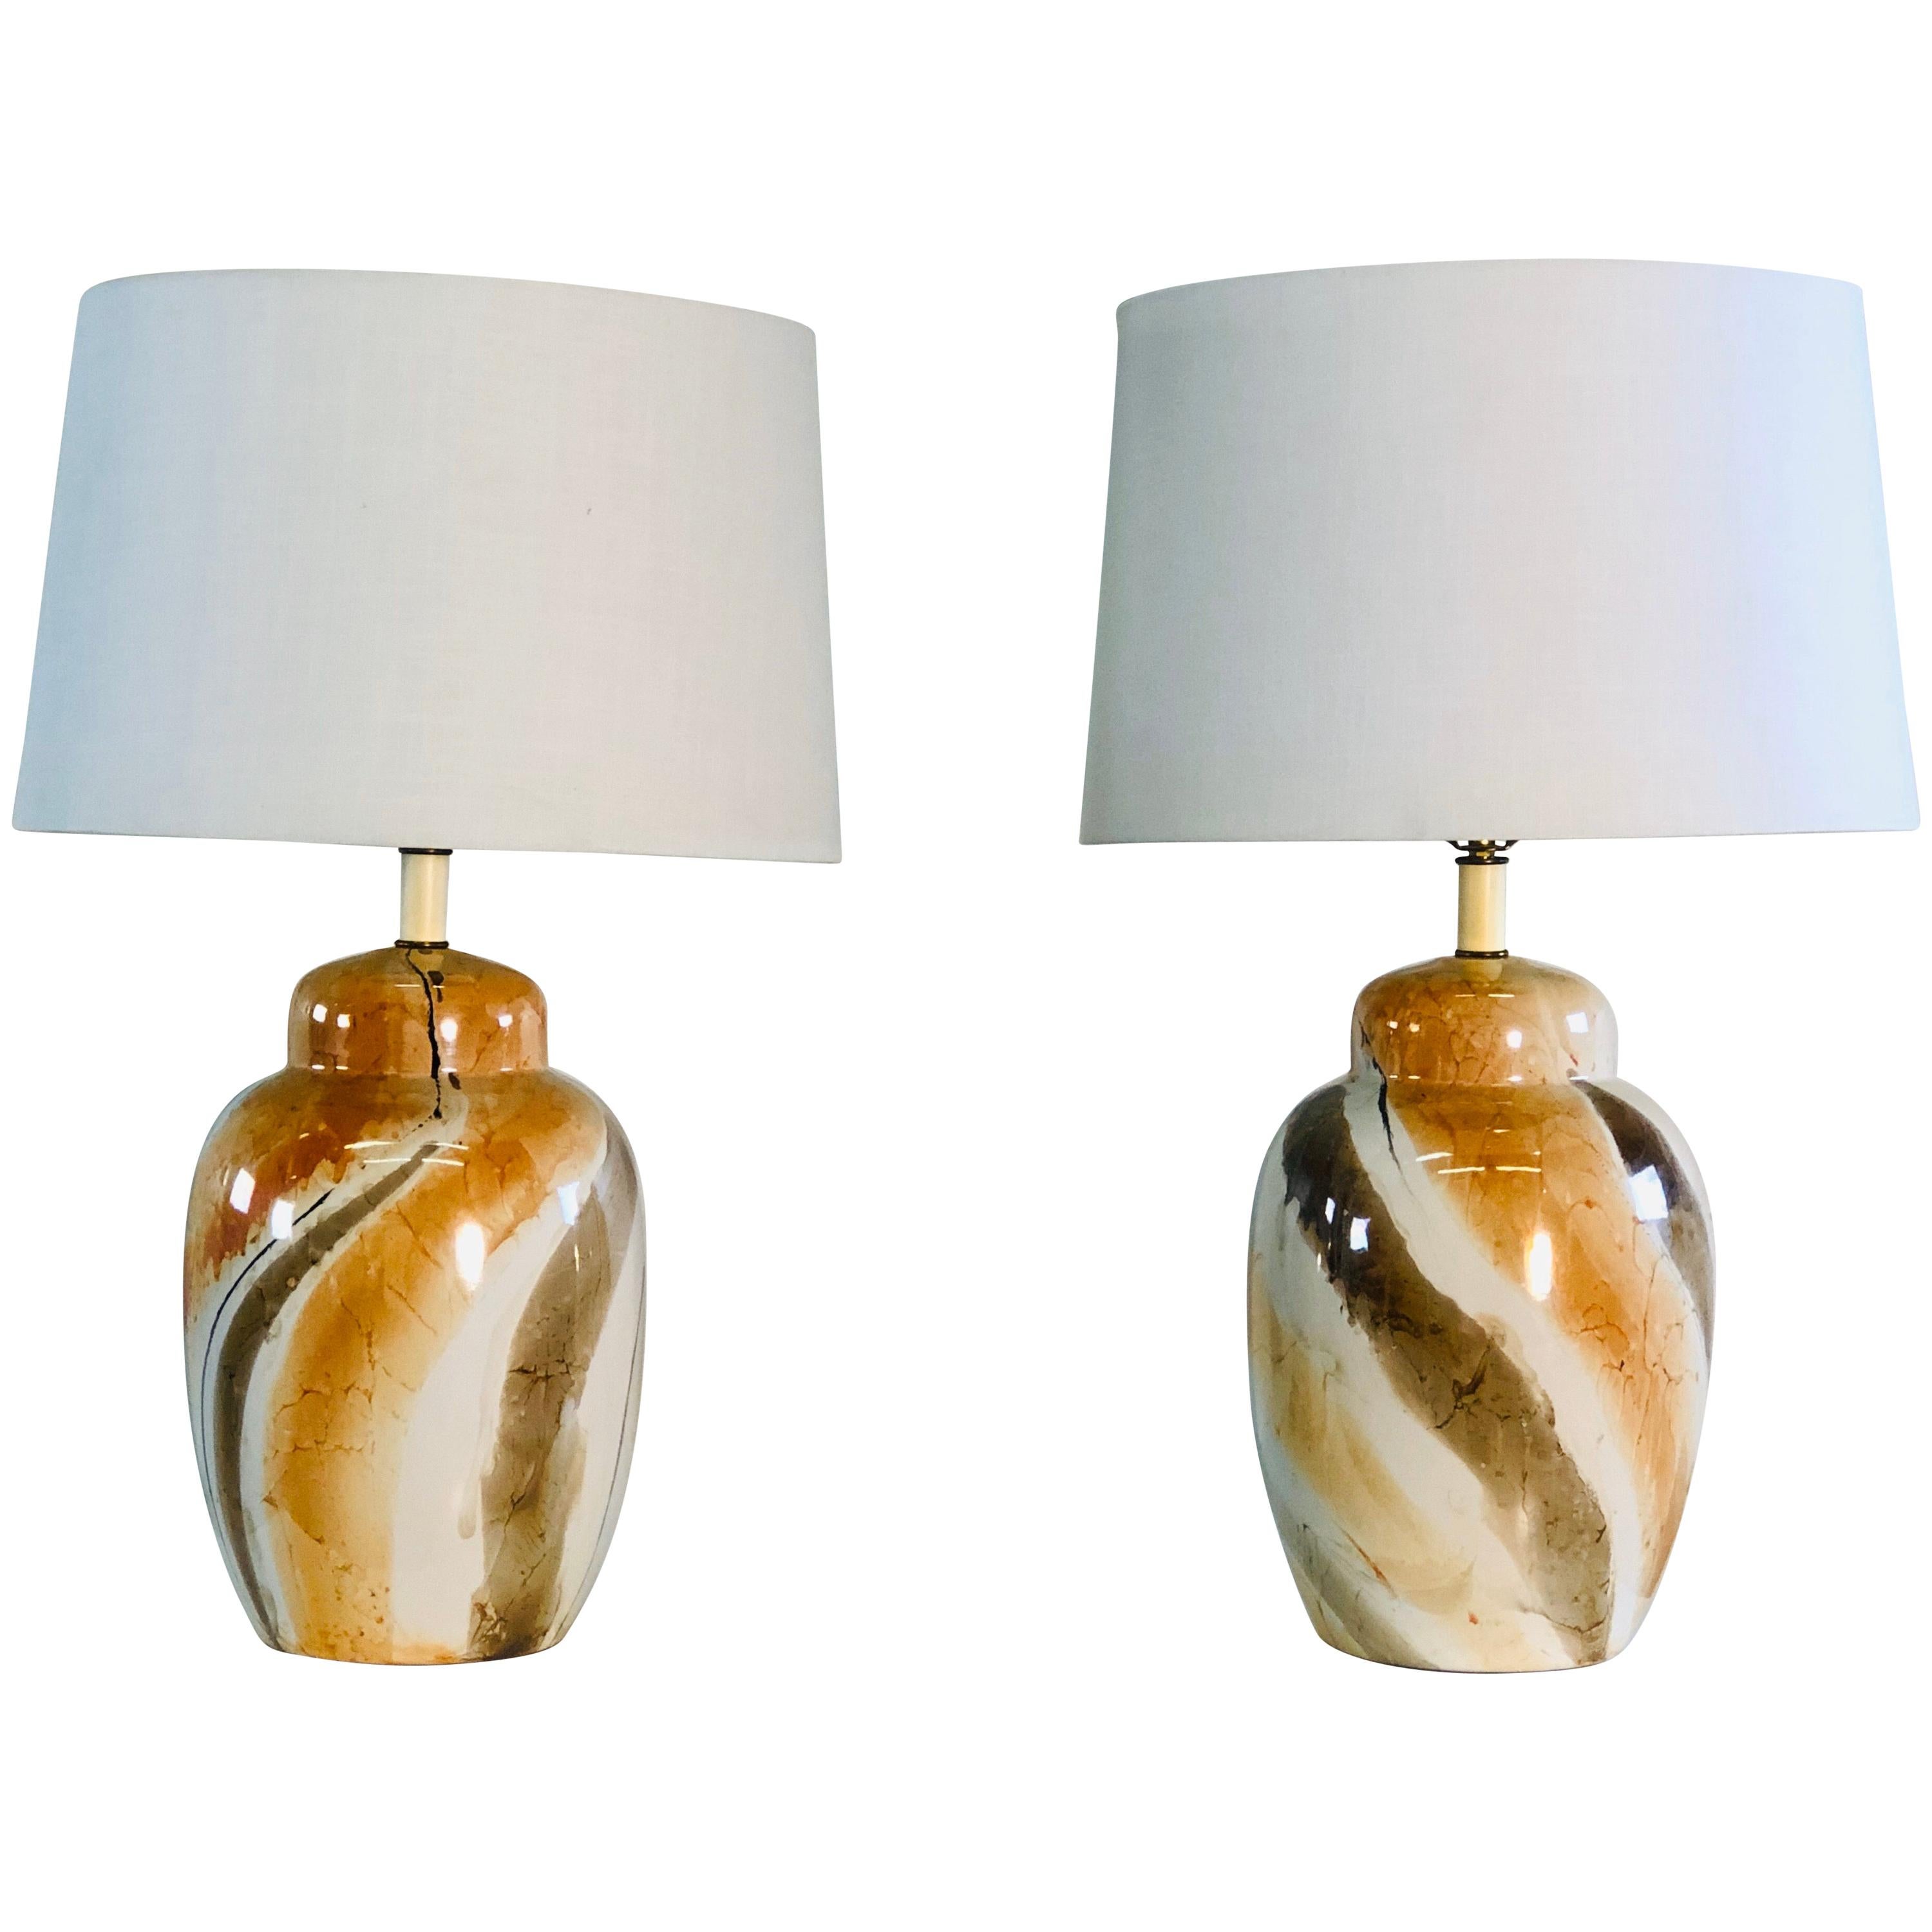 Vintage 1960s Marblized Ceramic Table Lamps, Pair For Sale